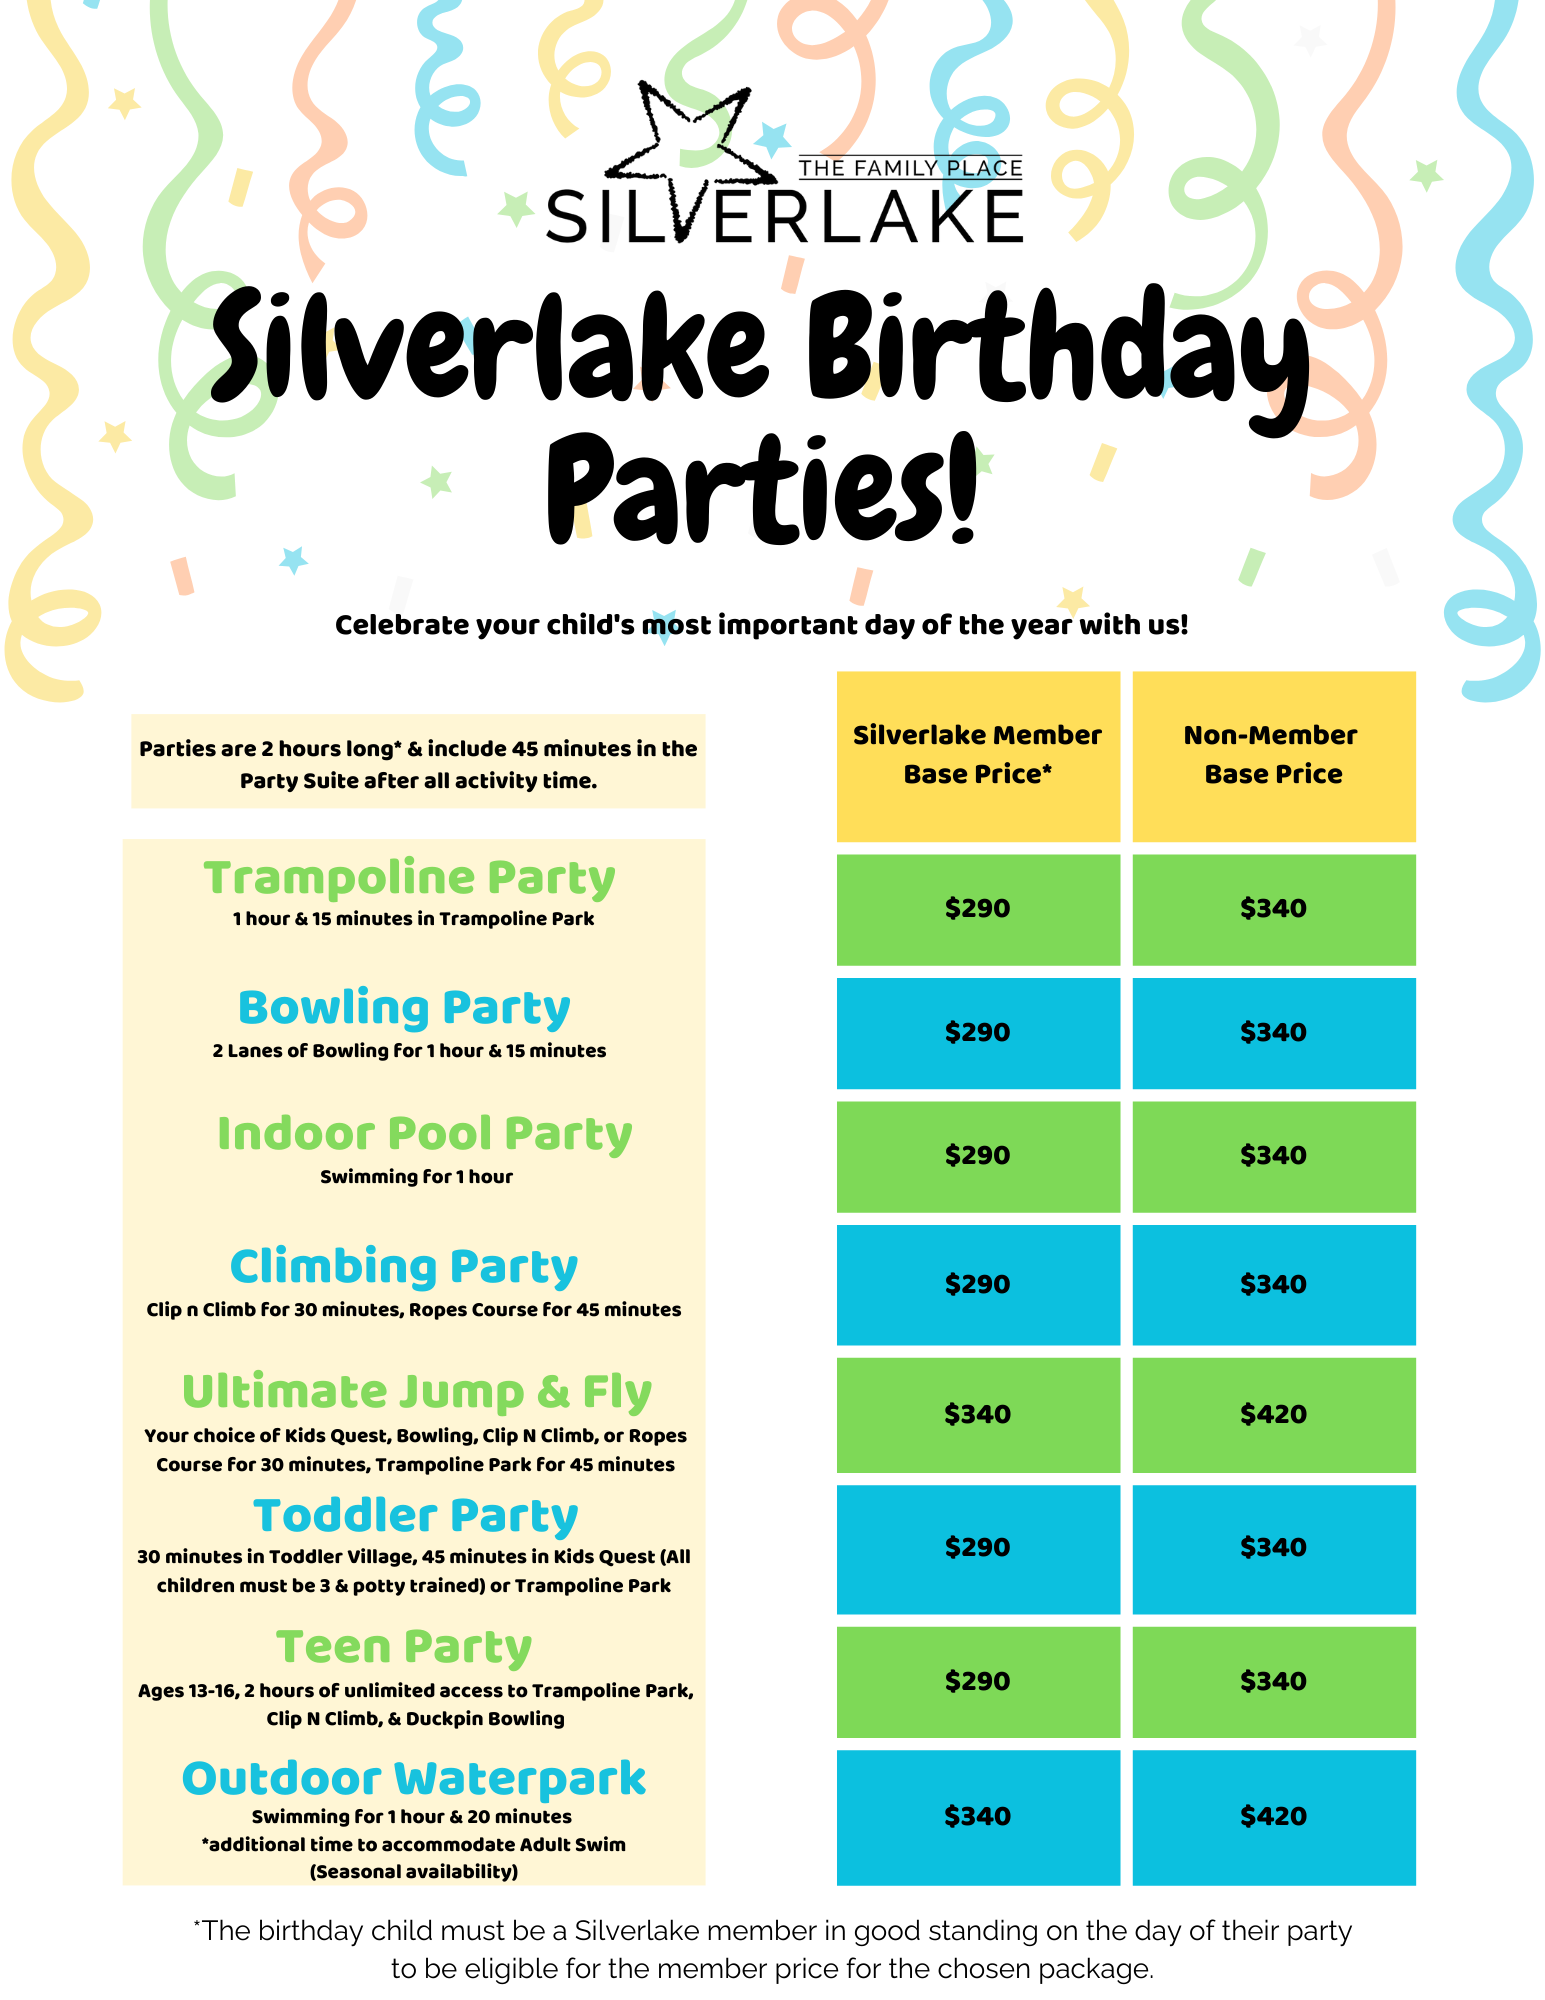 Birthday Parties – Silverlake "The Family Place"